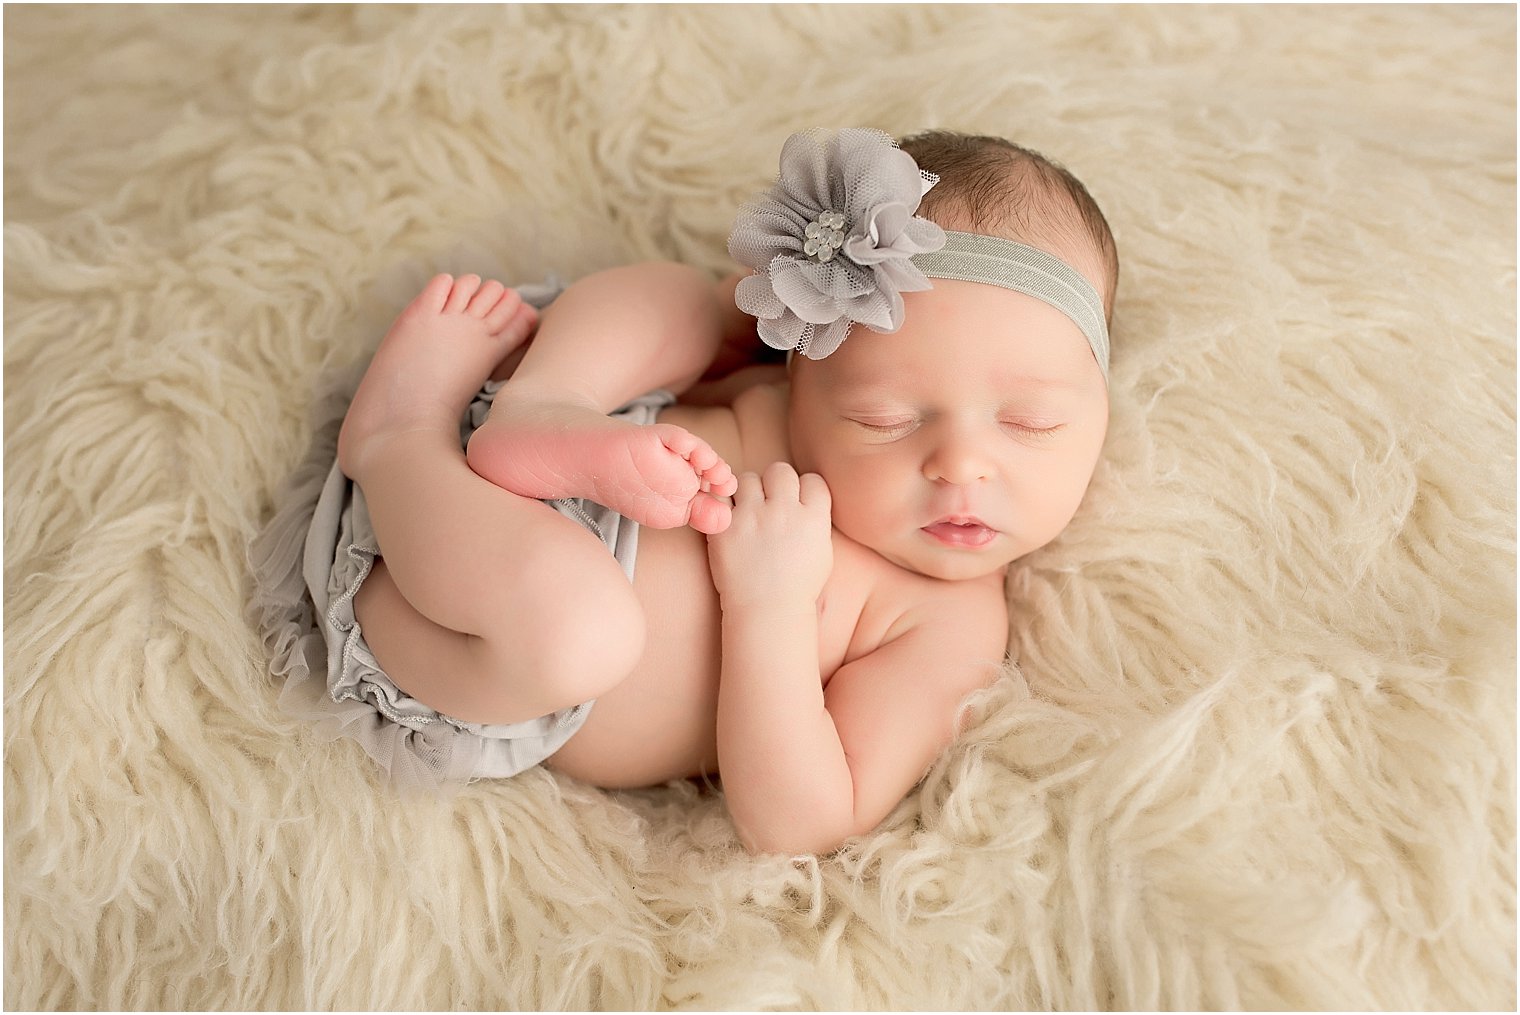 Baby in cream and gray